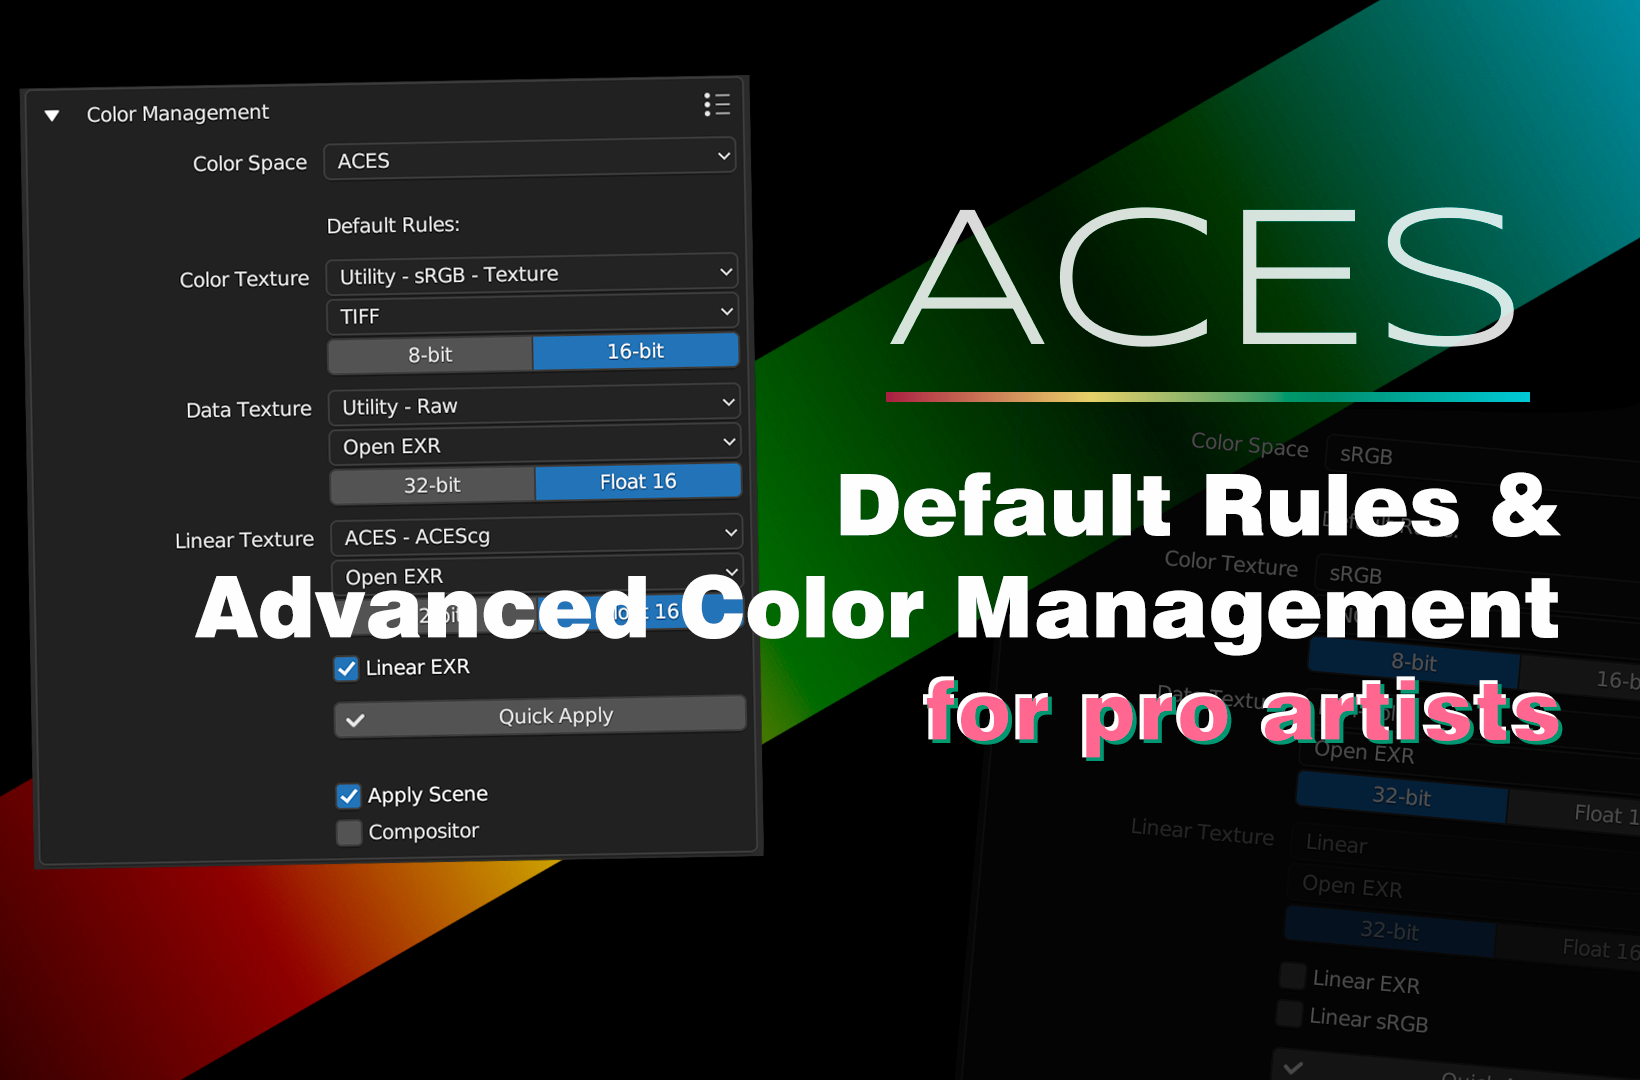 Supports ACES out of the box, Default Rules & Color Management for pro artists